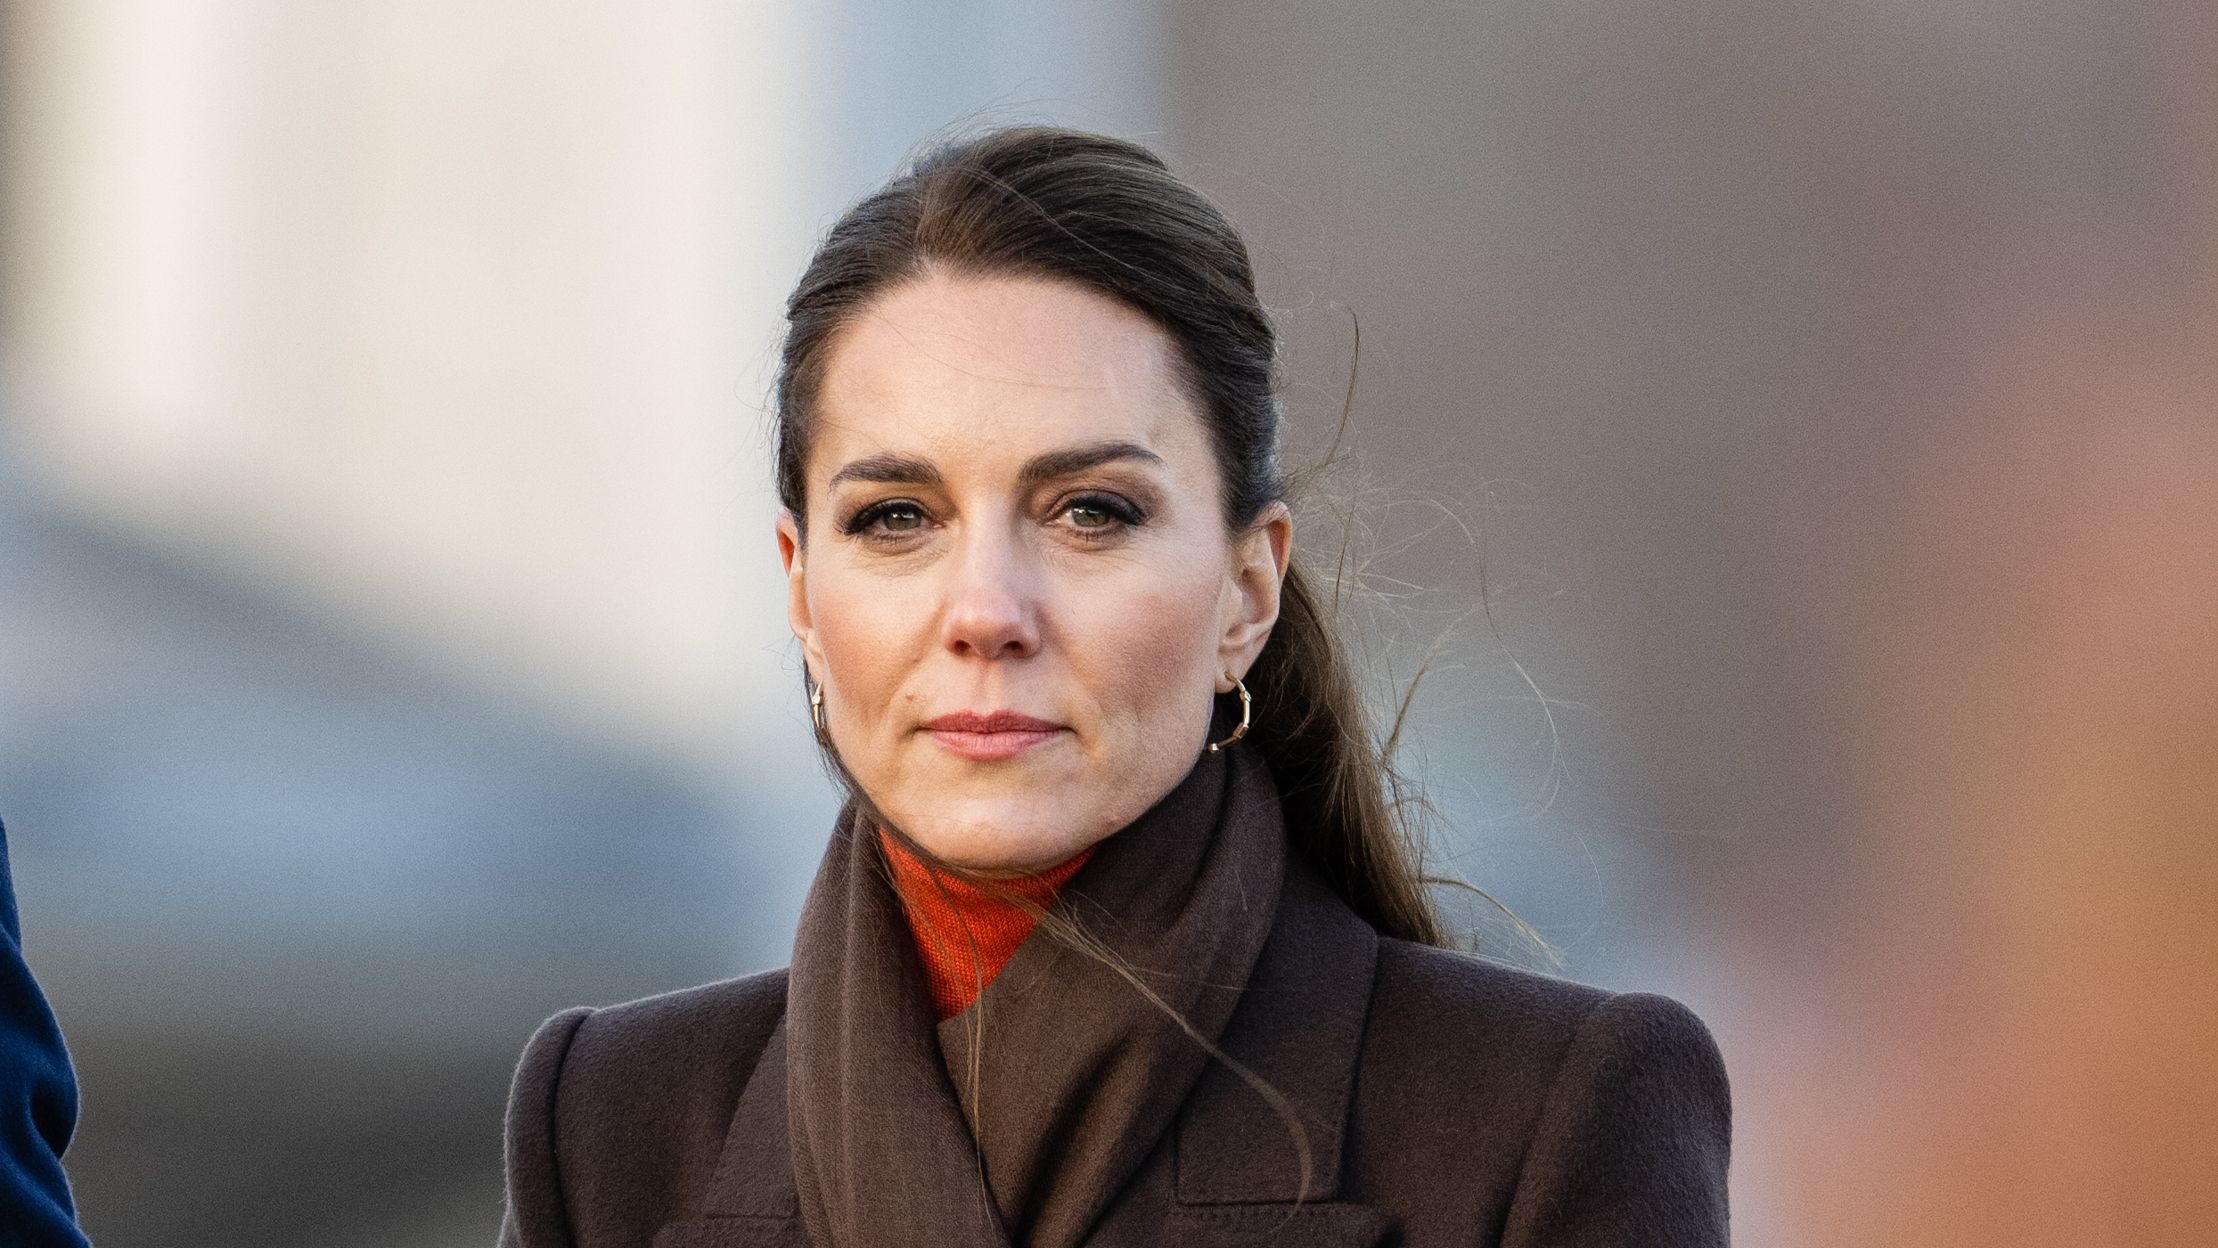 Kate Middleton Releases a Rare Statement About Her Absence from Royal Duties